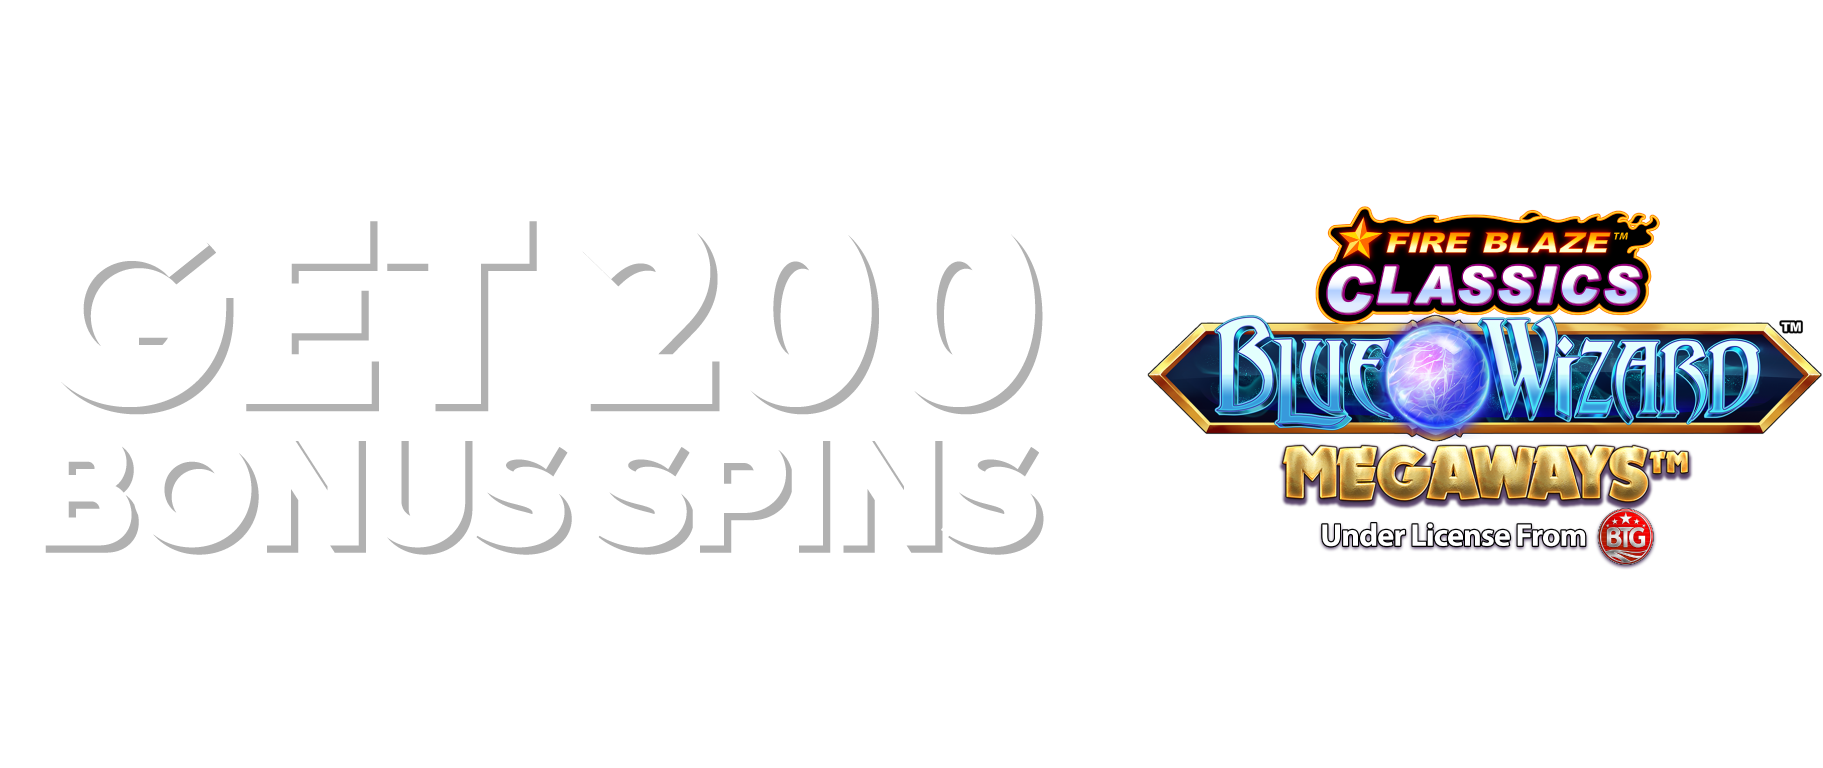 GRAB 200 BONUS SPINS • when you deposit and spend £10 on Slots